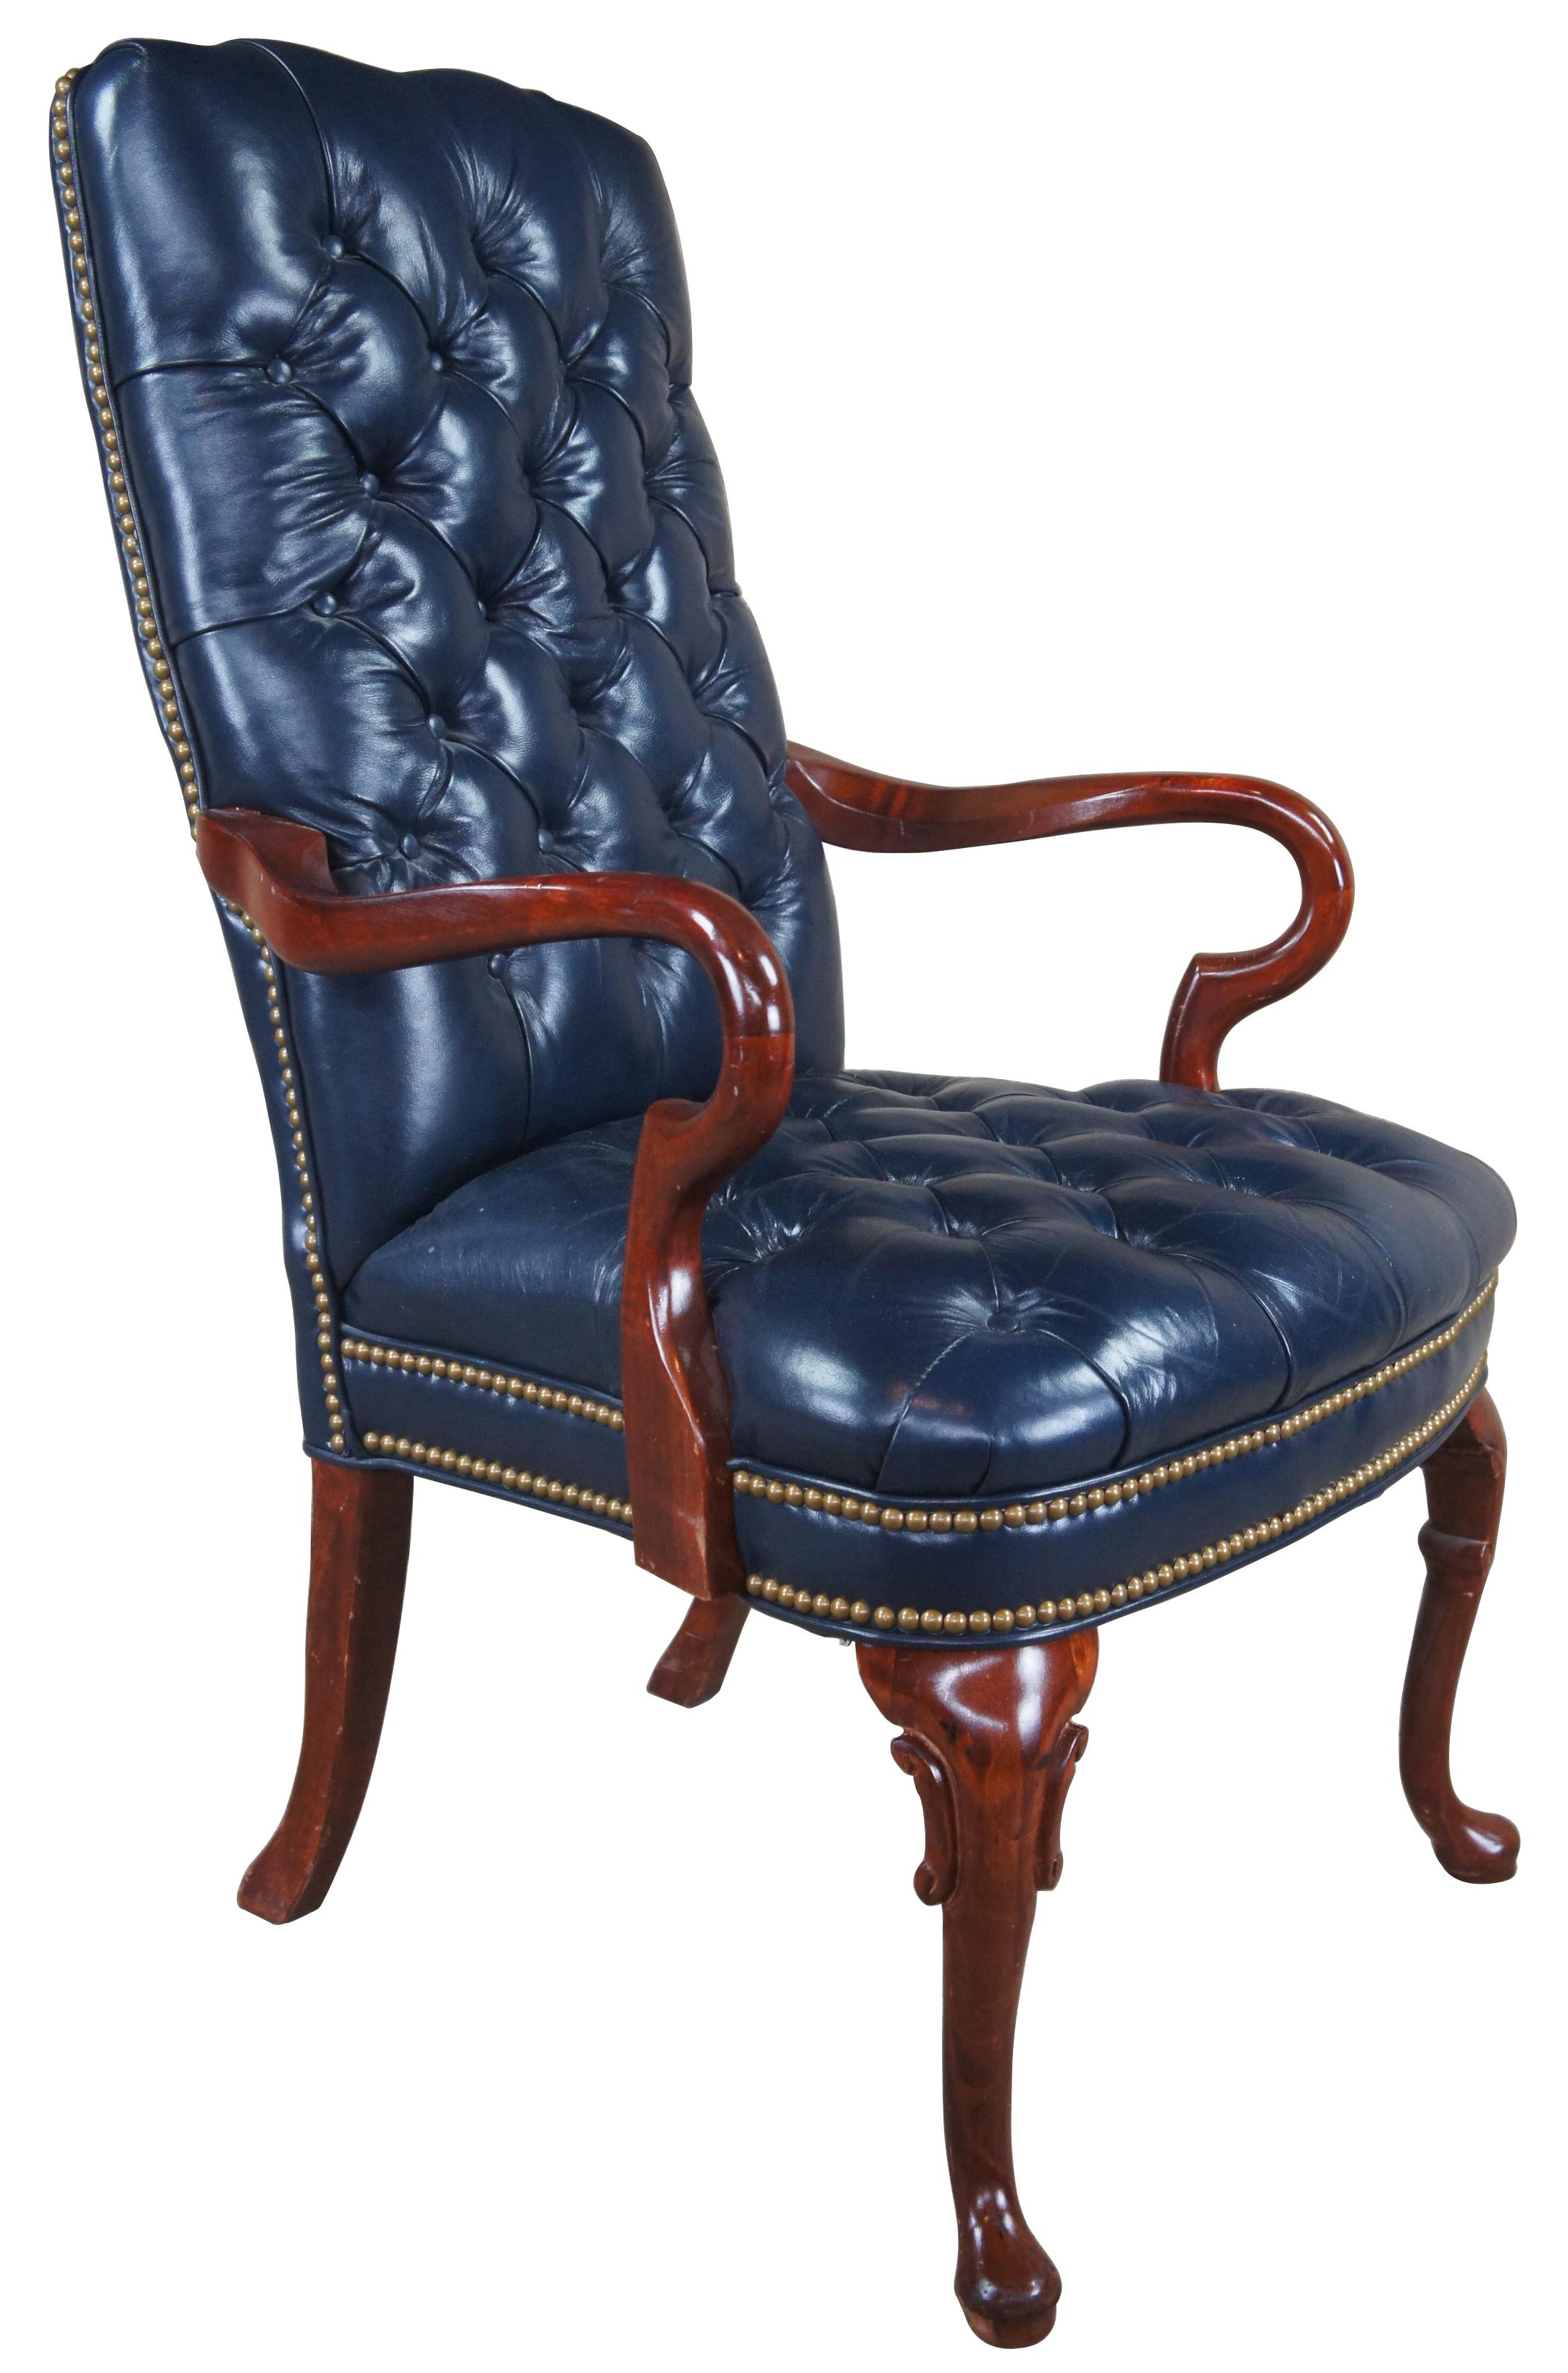 Vintage Queen Anne office or desk chair featuring tufted blue leather with gooseneck arms and nailhead trim.